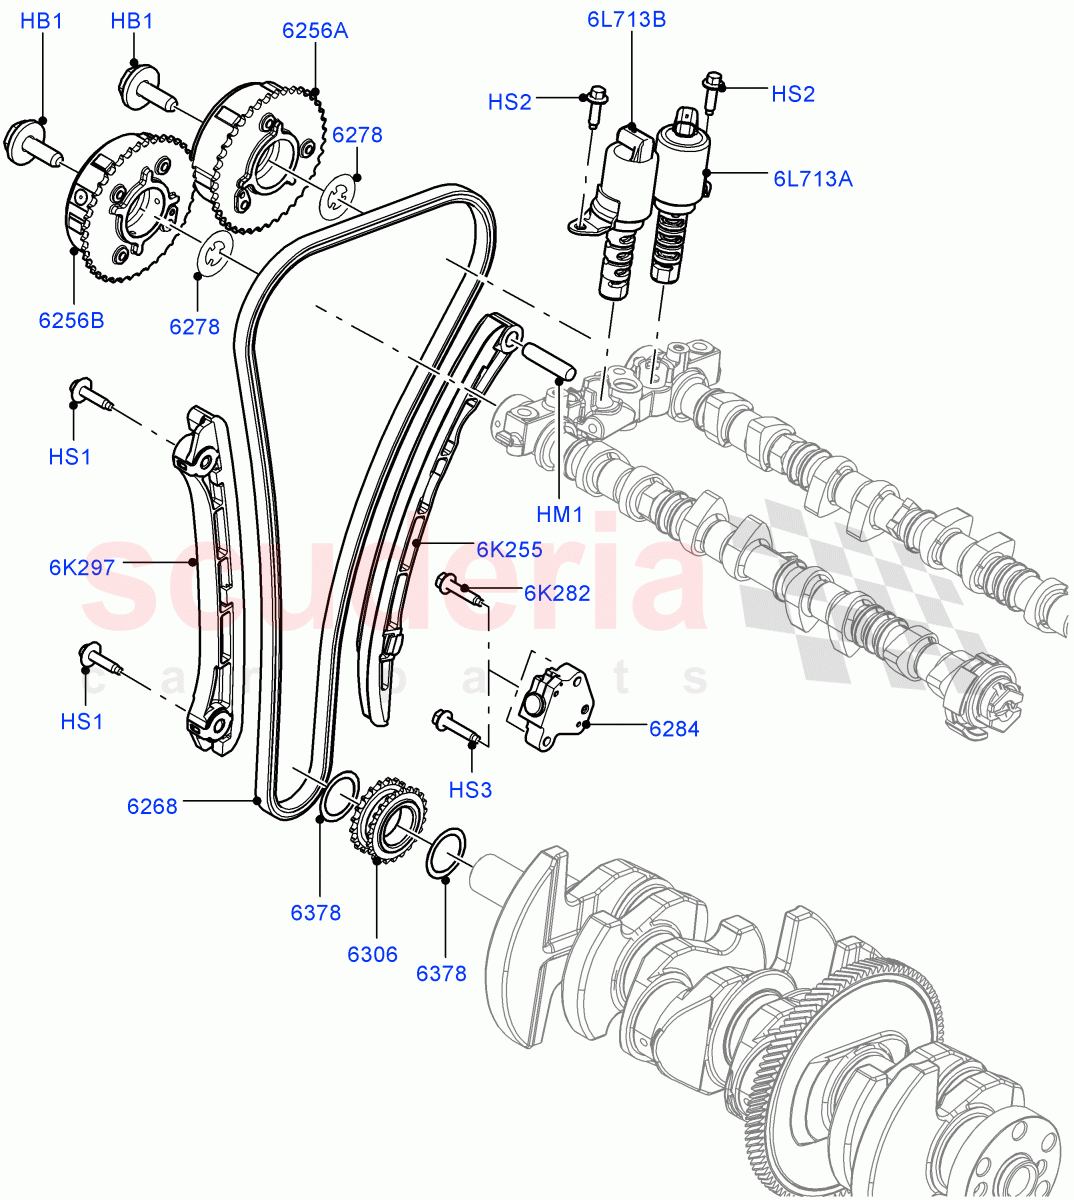 Timing Gear(2.0L 16V TIVCT T/C 240PS Petrol) of Land Rover Land Rover Range Rover (2012-2021) [2.0 Turbo Petrol GTDI]